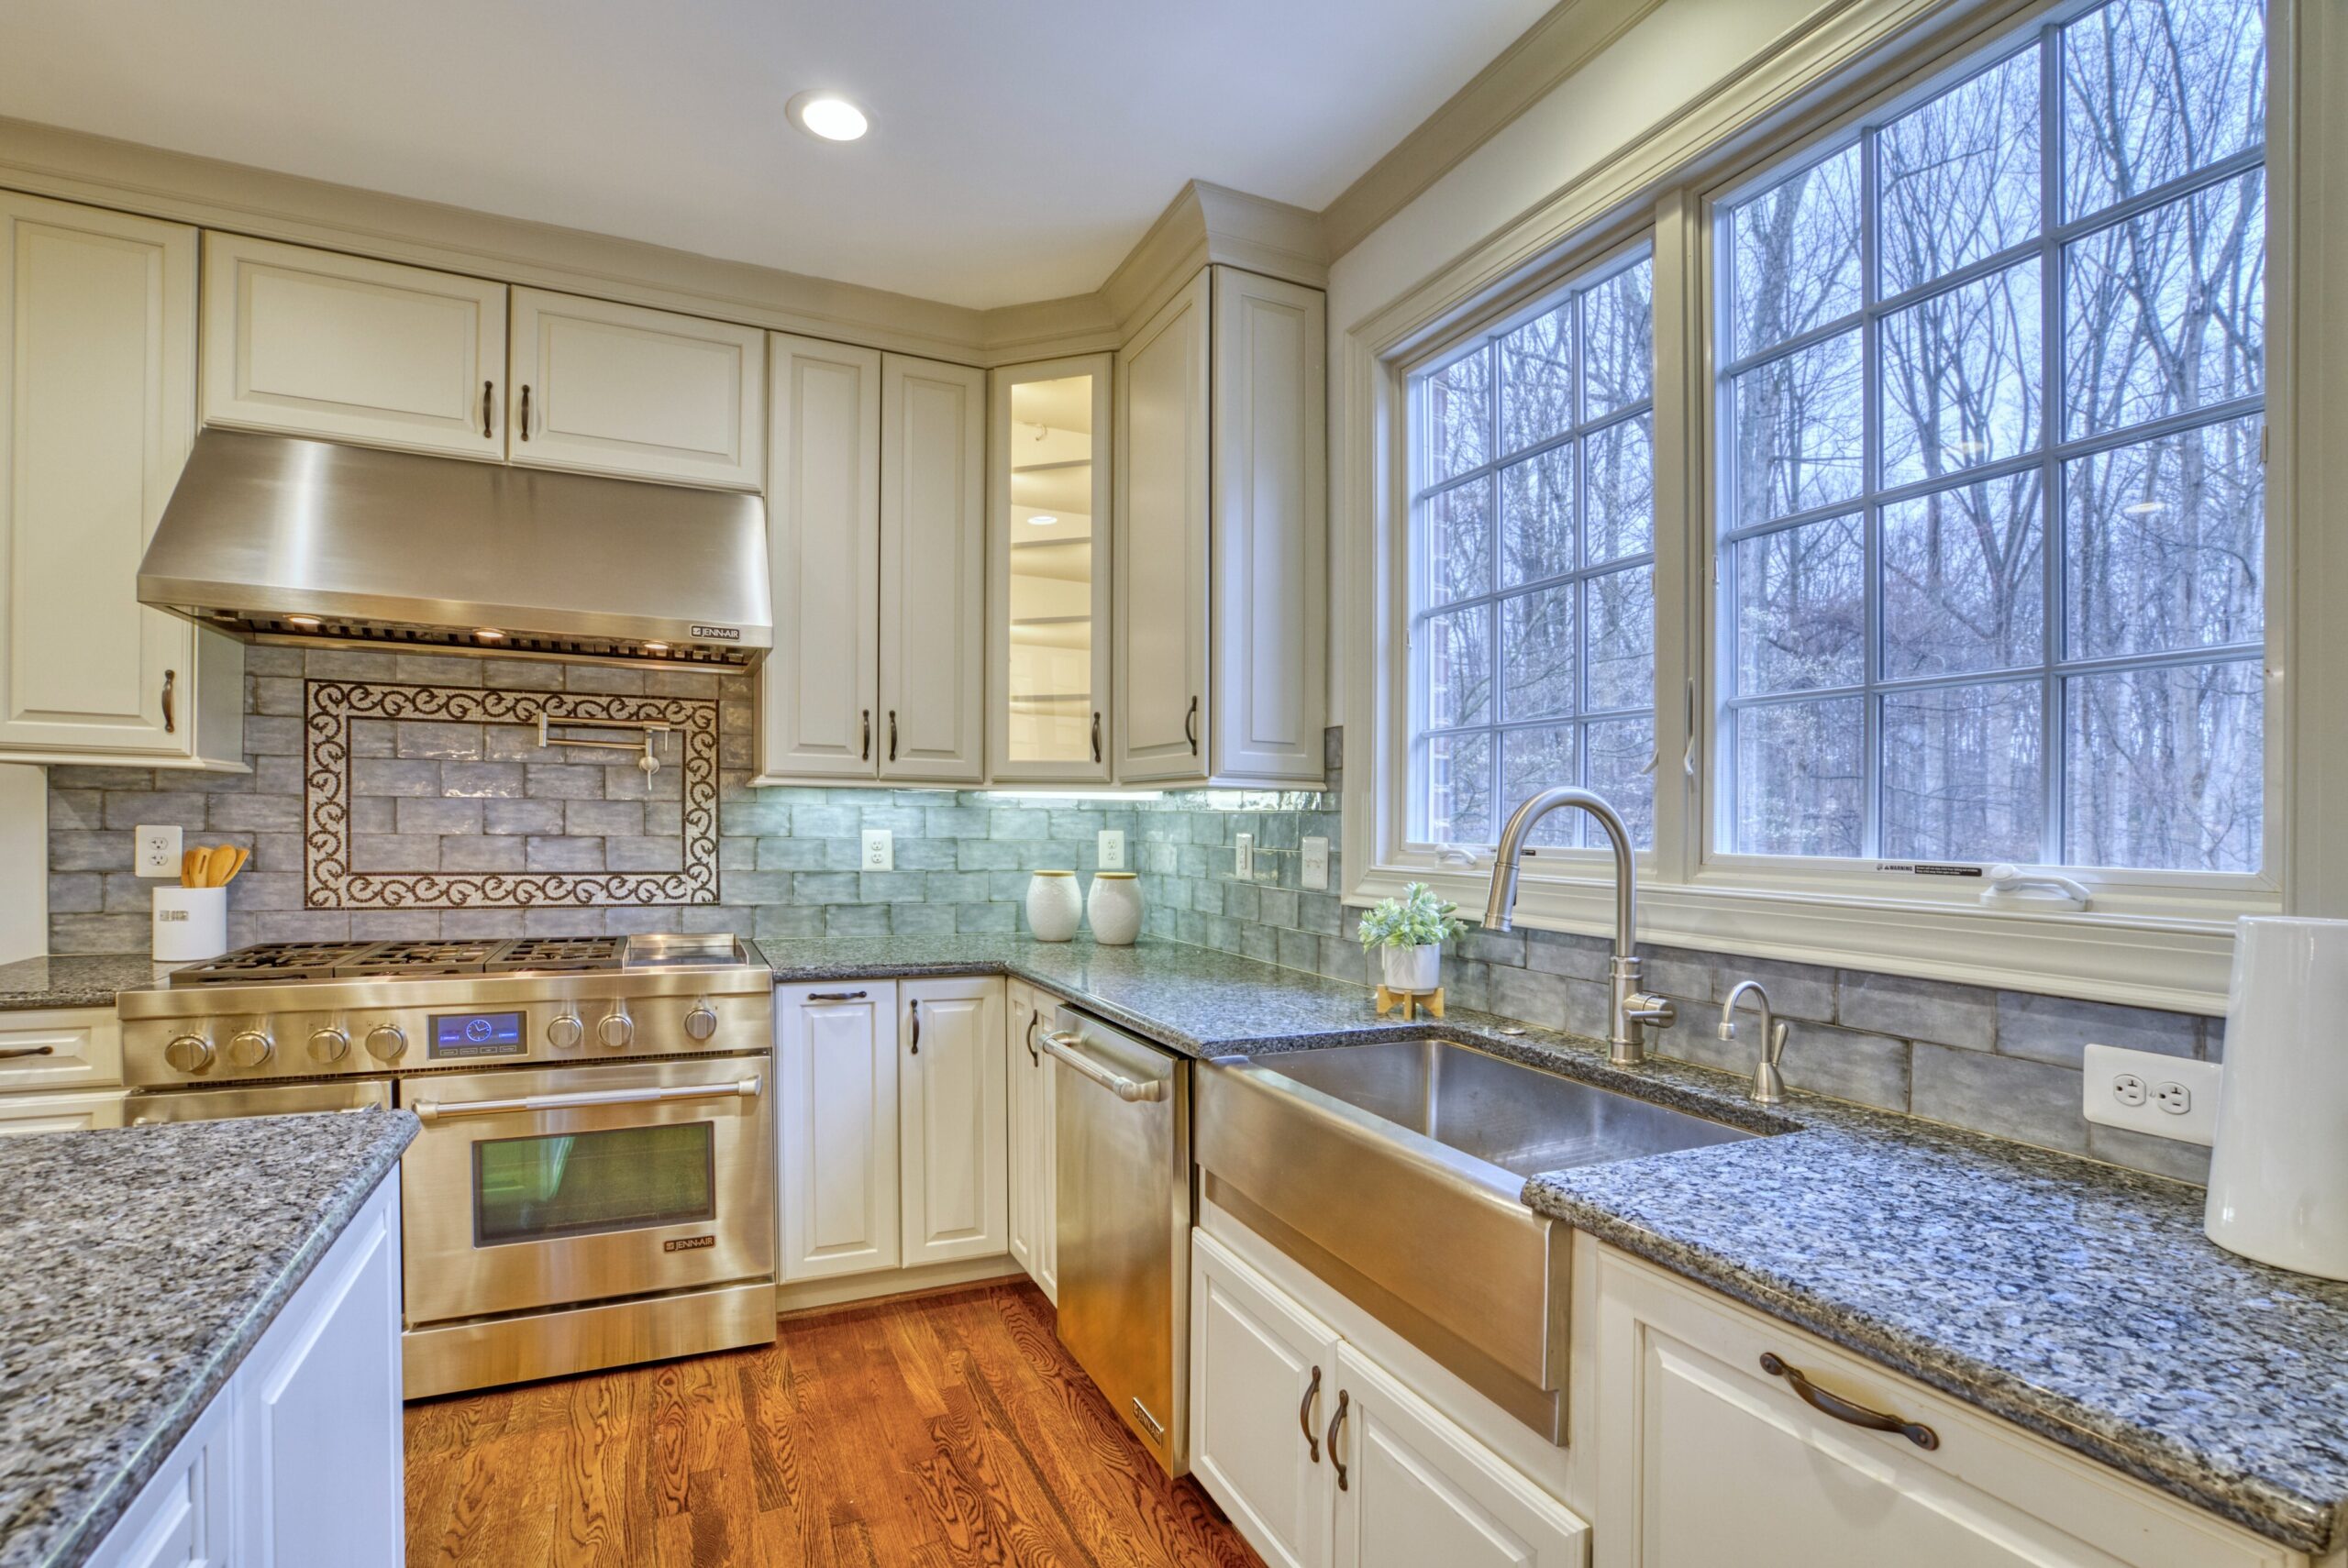 Professional interior photo of 718 Potomac Knolls Dr - showing the kitchen with stainless appliances, white cabinets, granite counters and 2 sinks